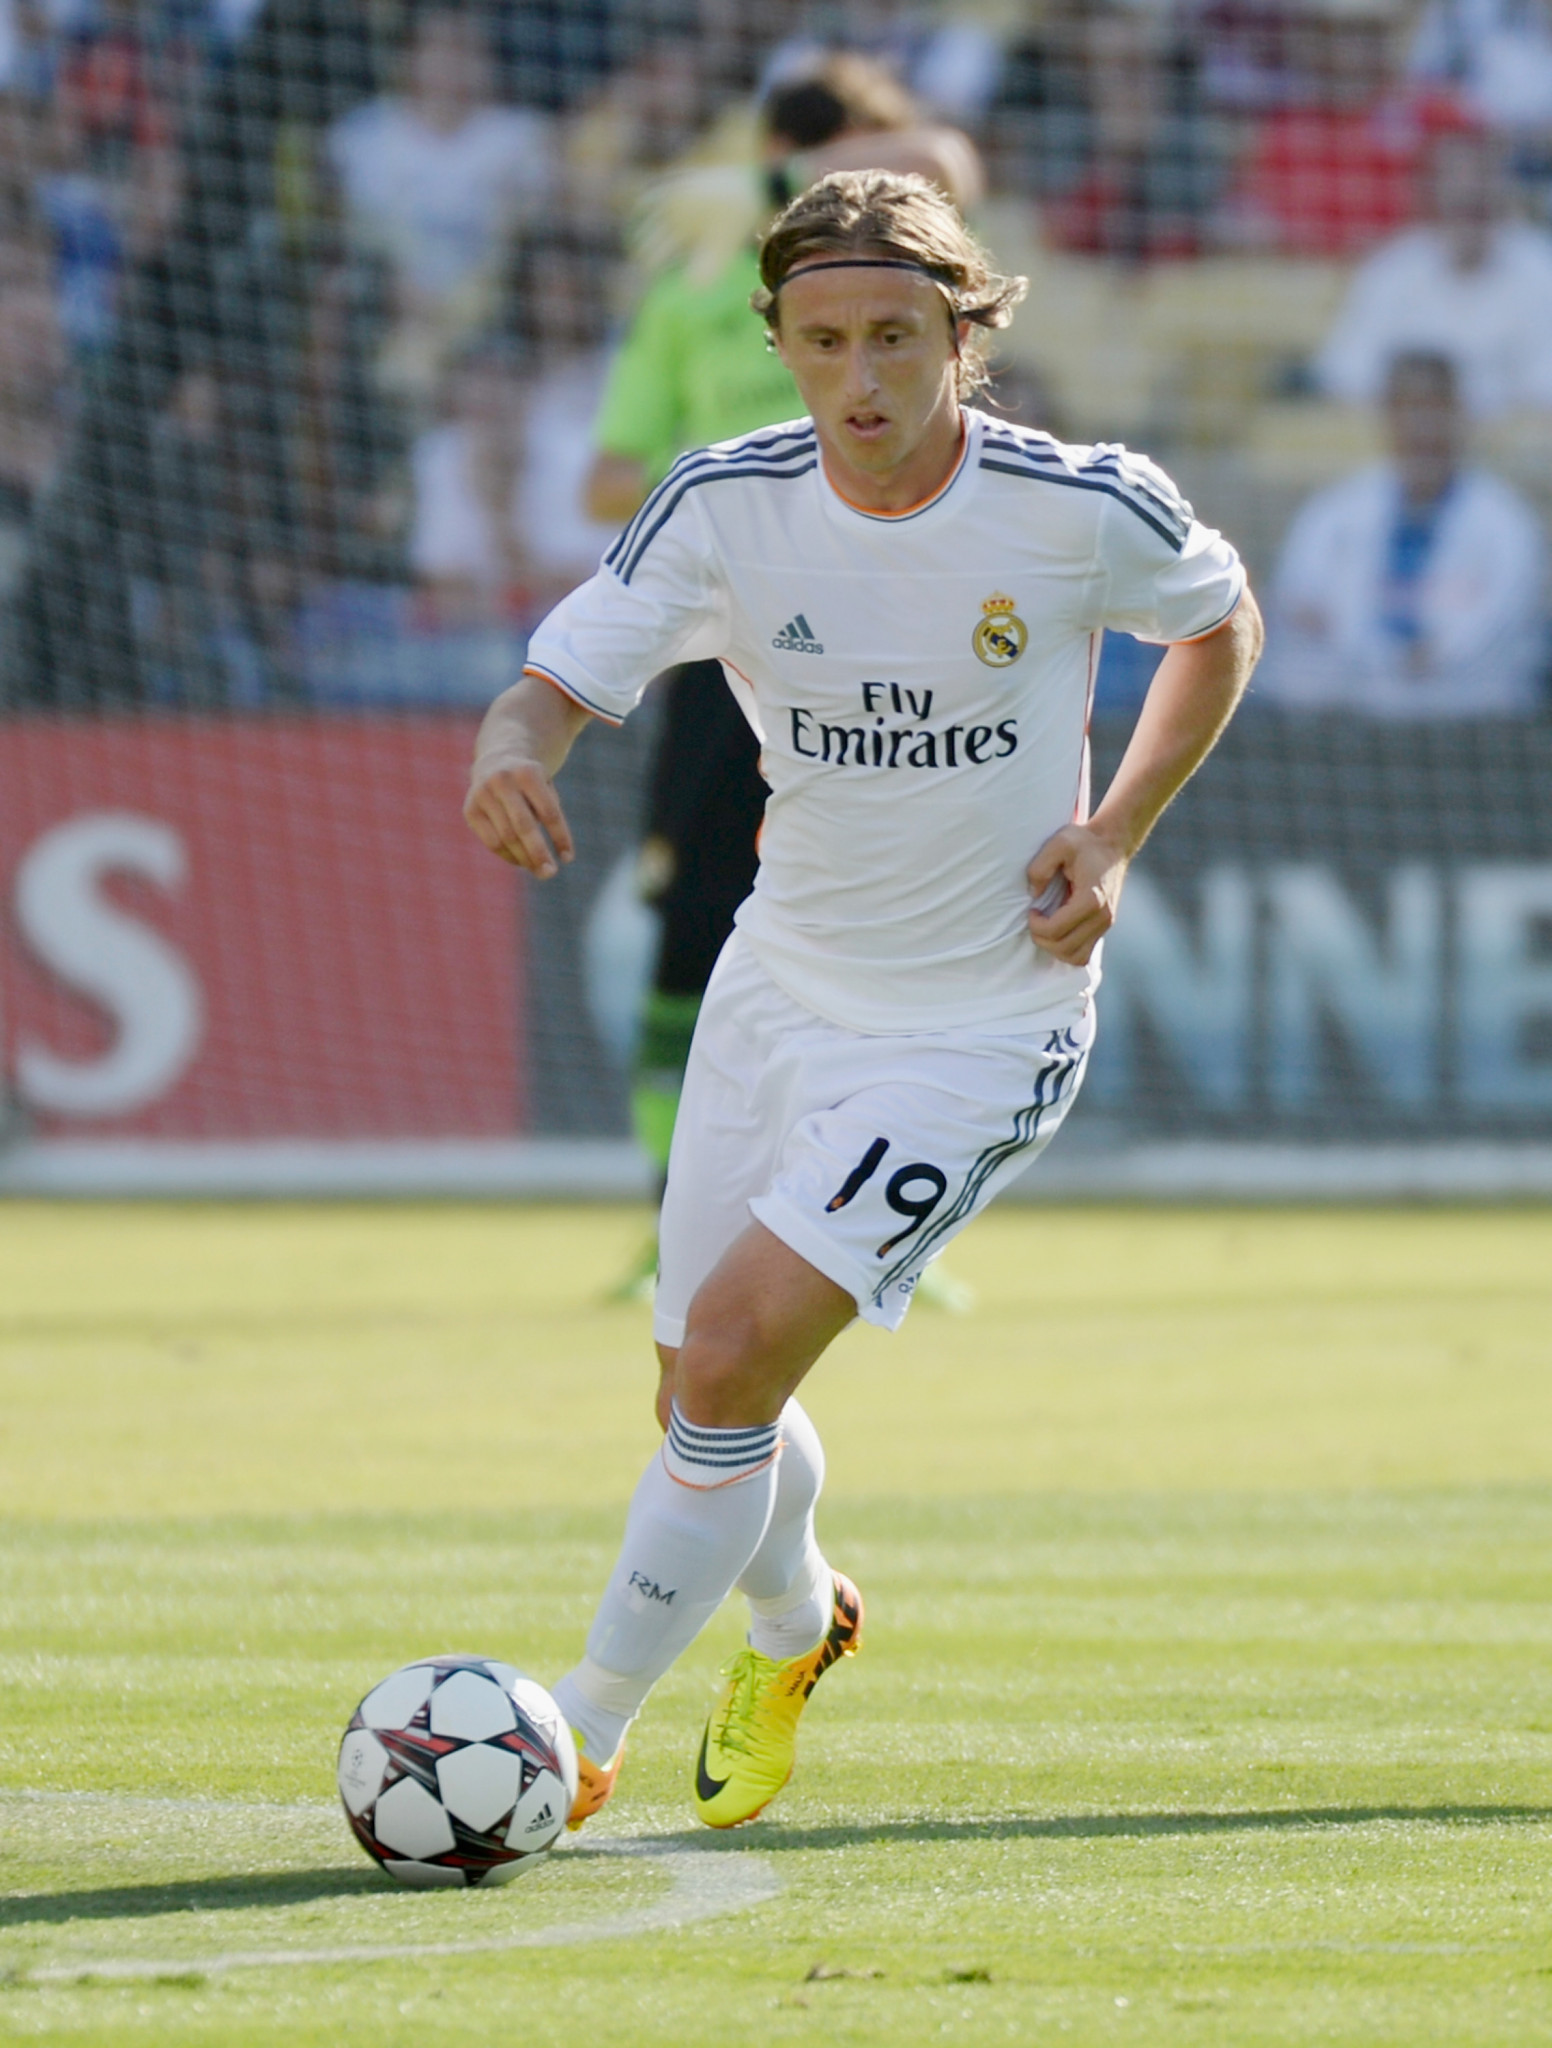 Real Madrid midfielder Luca Modric won player of the tournament at the 2018 FIFA World Cup and is favourite for this year's Ballon d'Or ©Getty Images